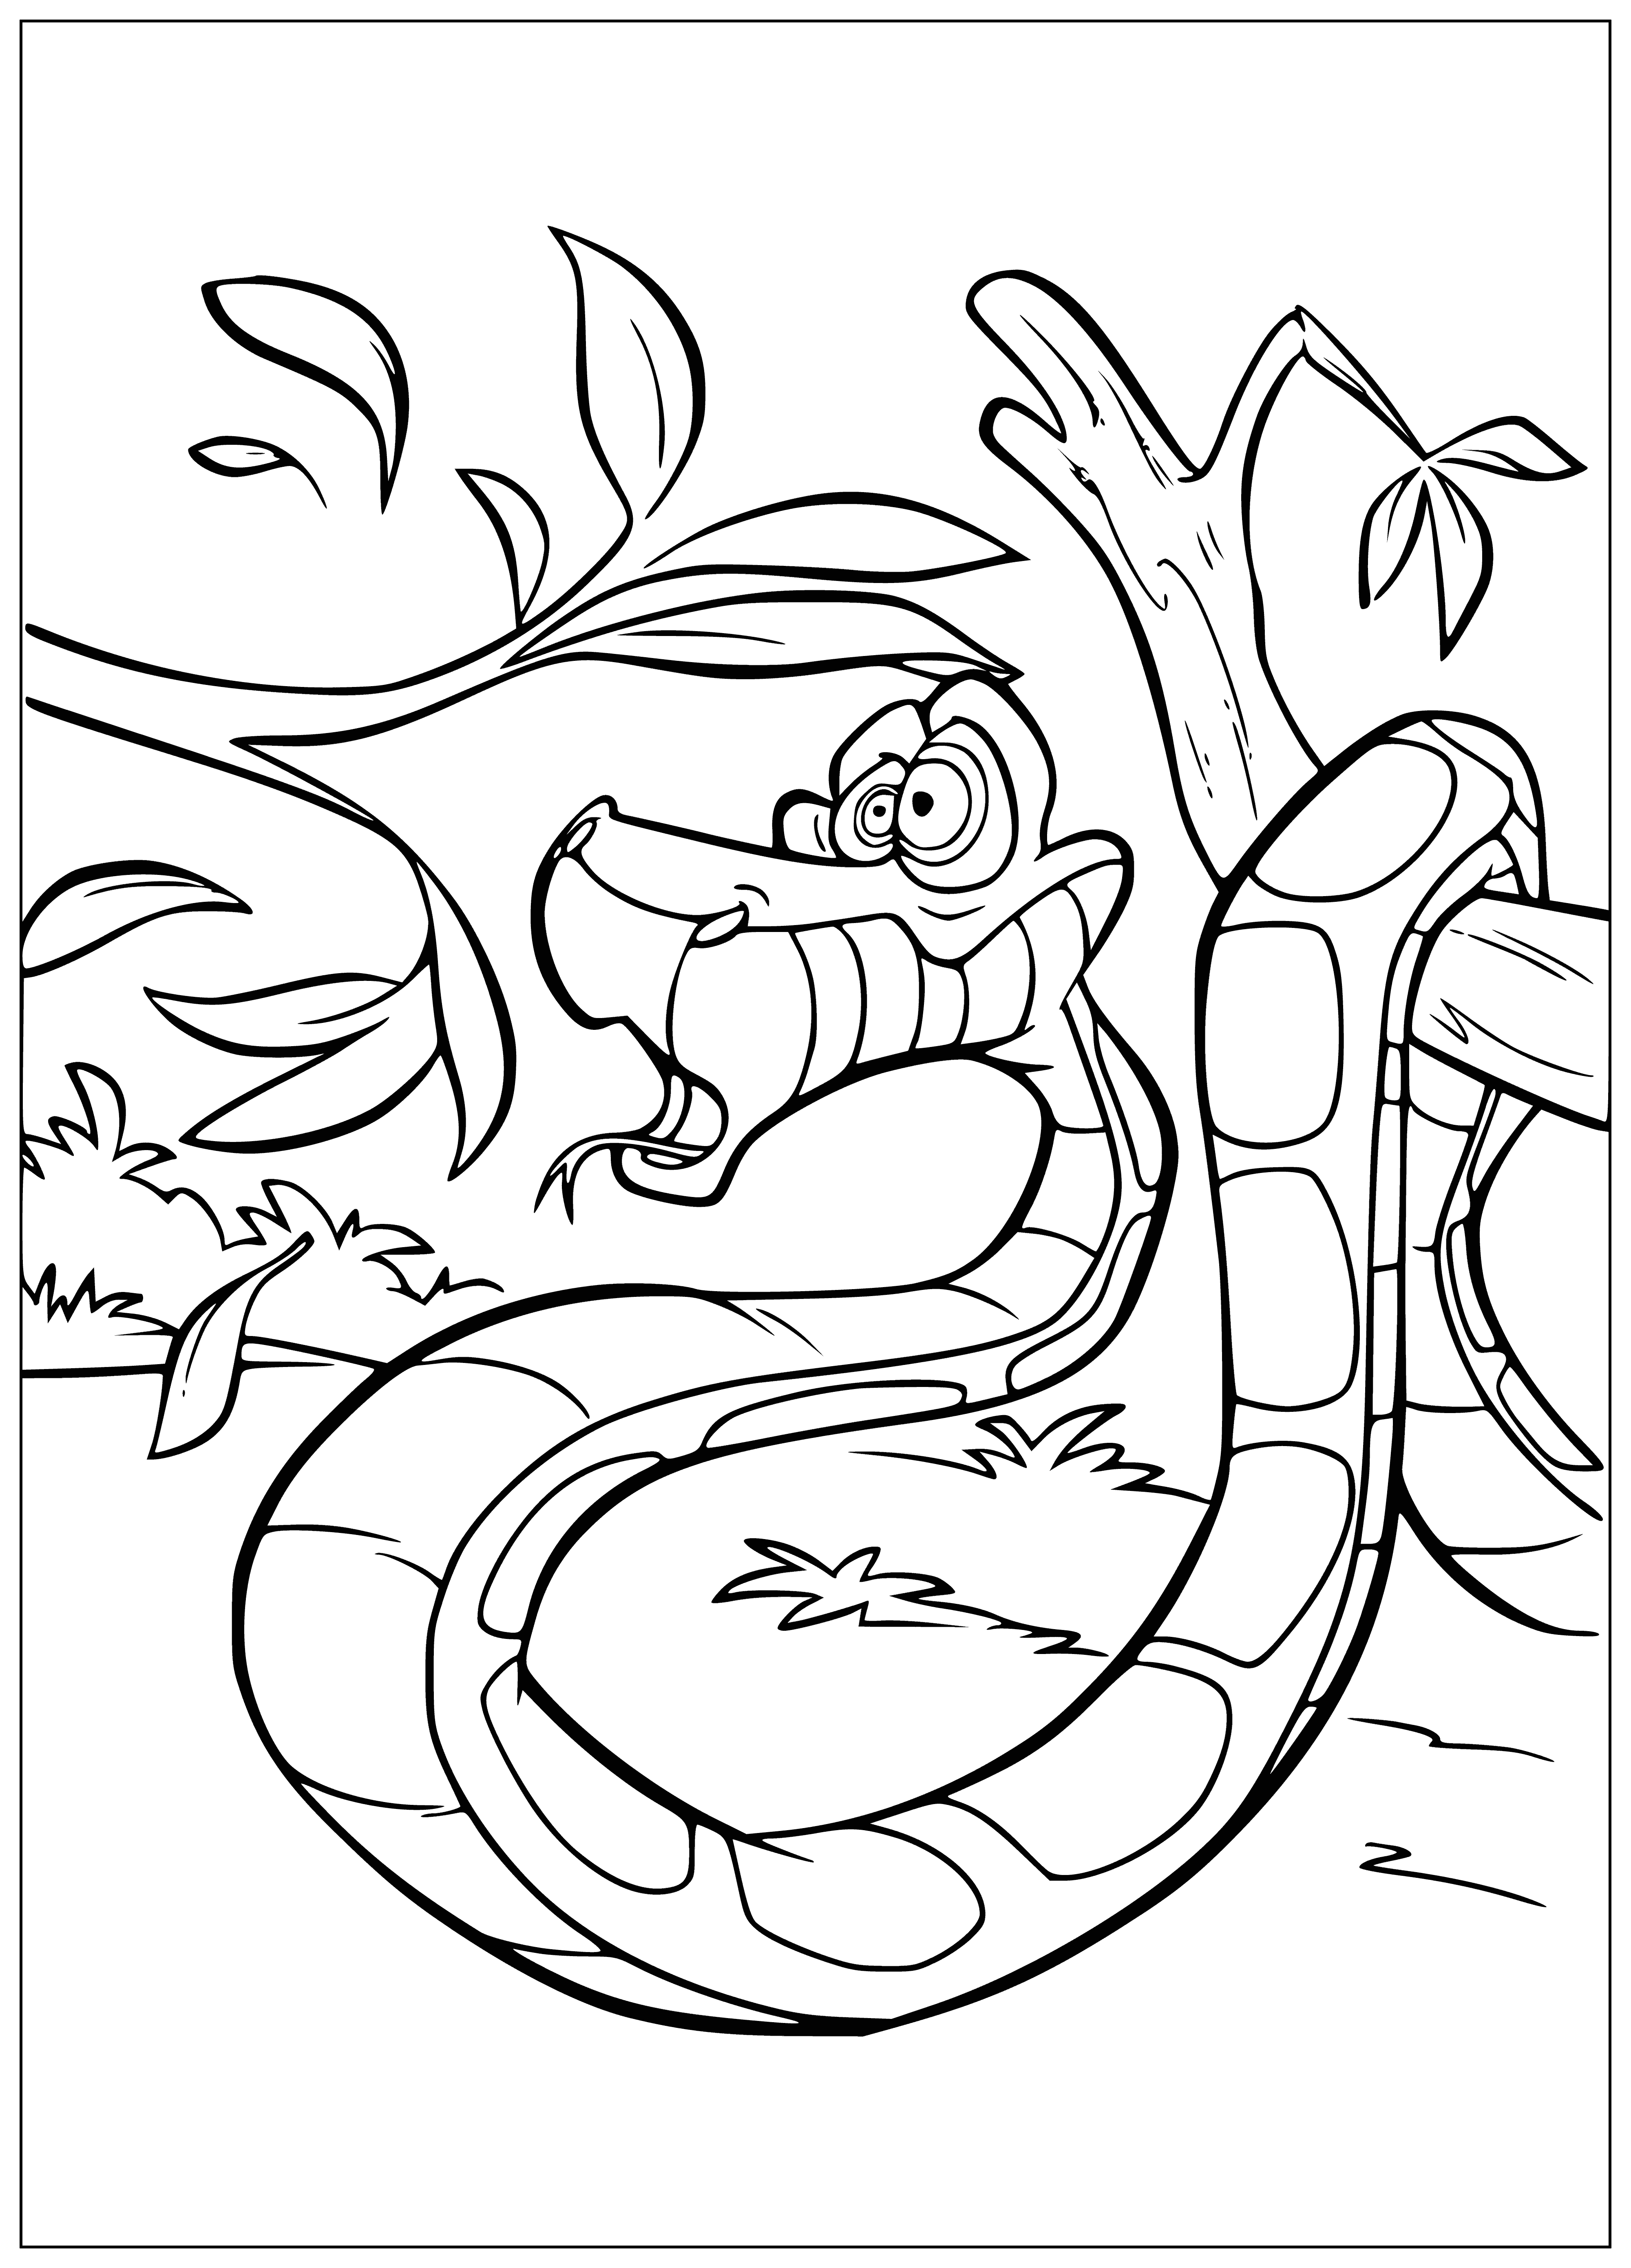 coloring page: Snake curled around tree in jungle: dark & light brown bands; head and tongue raised up.